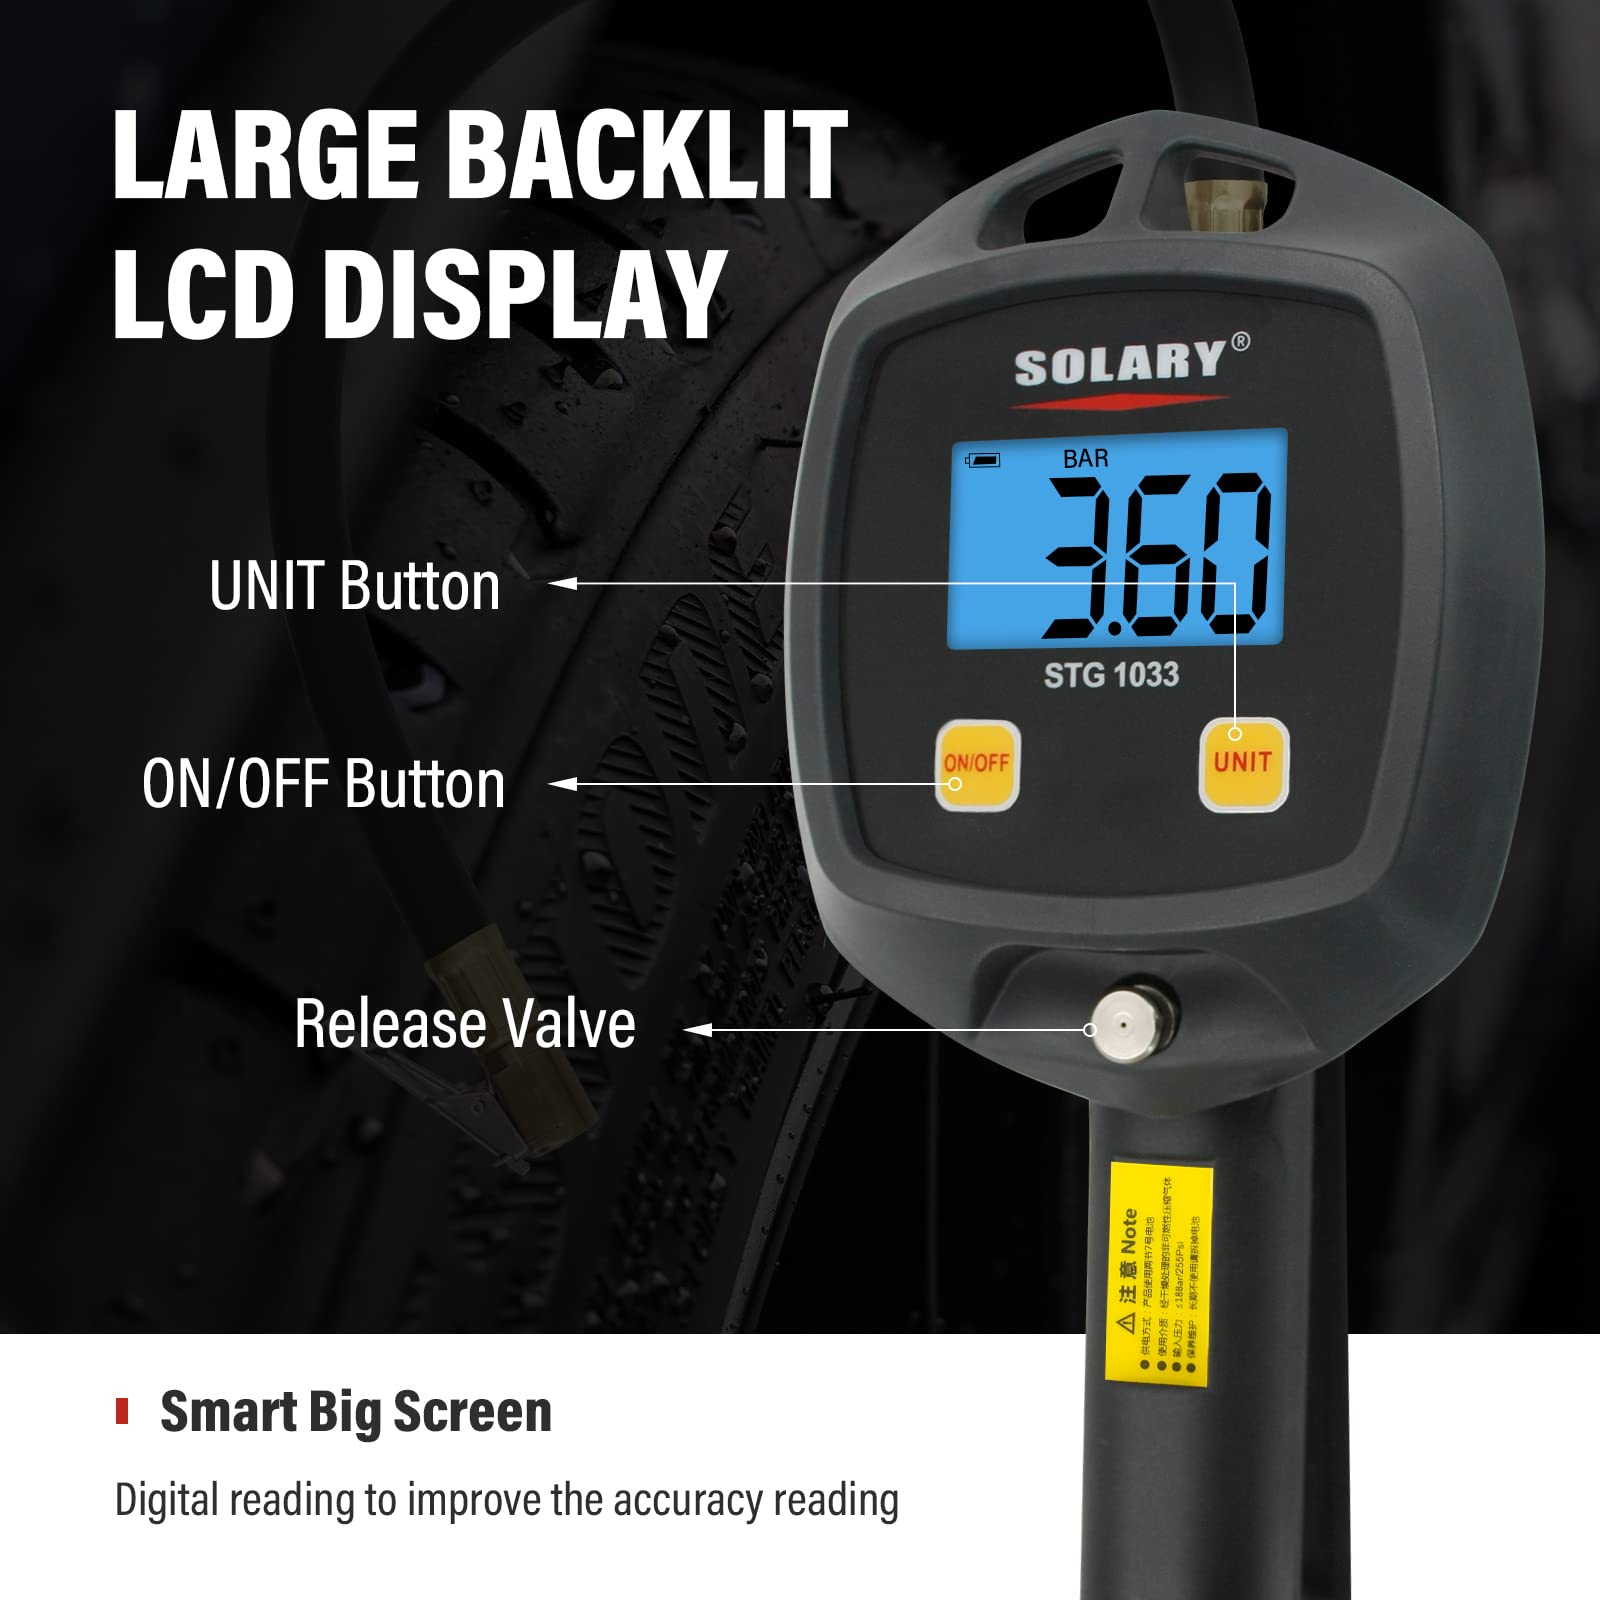 Solary Digital Tire Inflator with Pressure Gauge, 255 PSI LED Display Tire Inflator Gauge with Rubber Hose for Car Motorcycle Bike Truck - Auto Body Collision Repair Welding Products